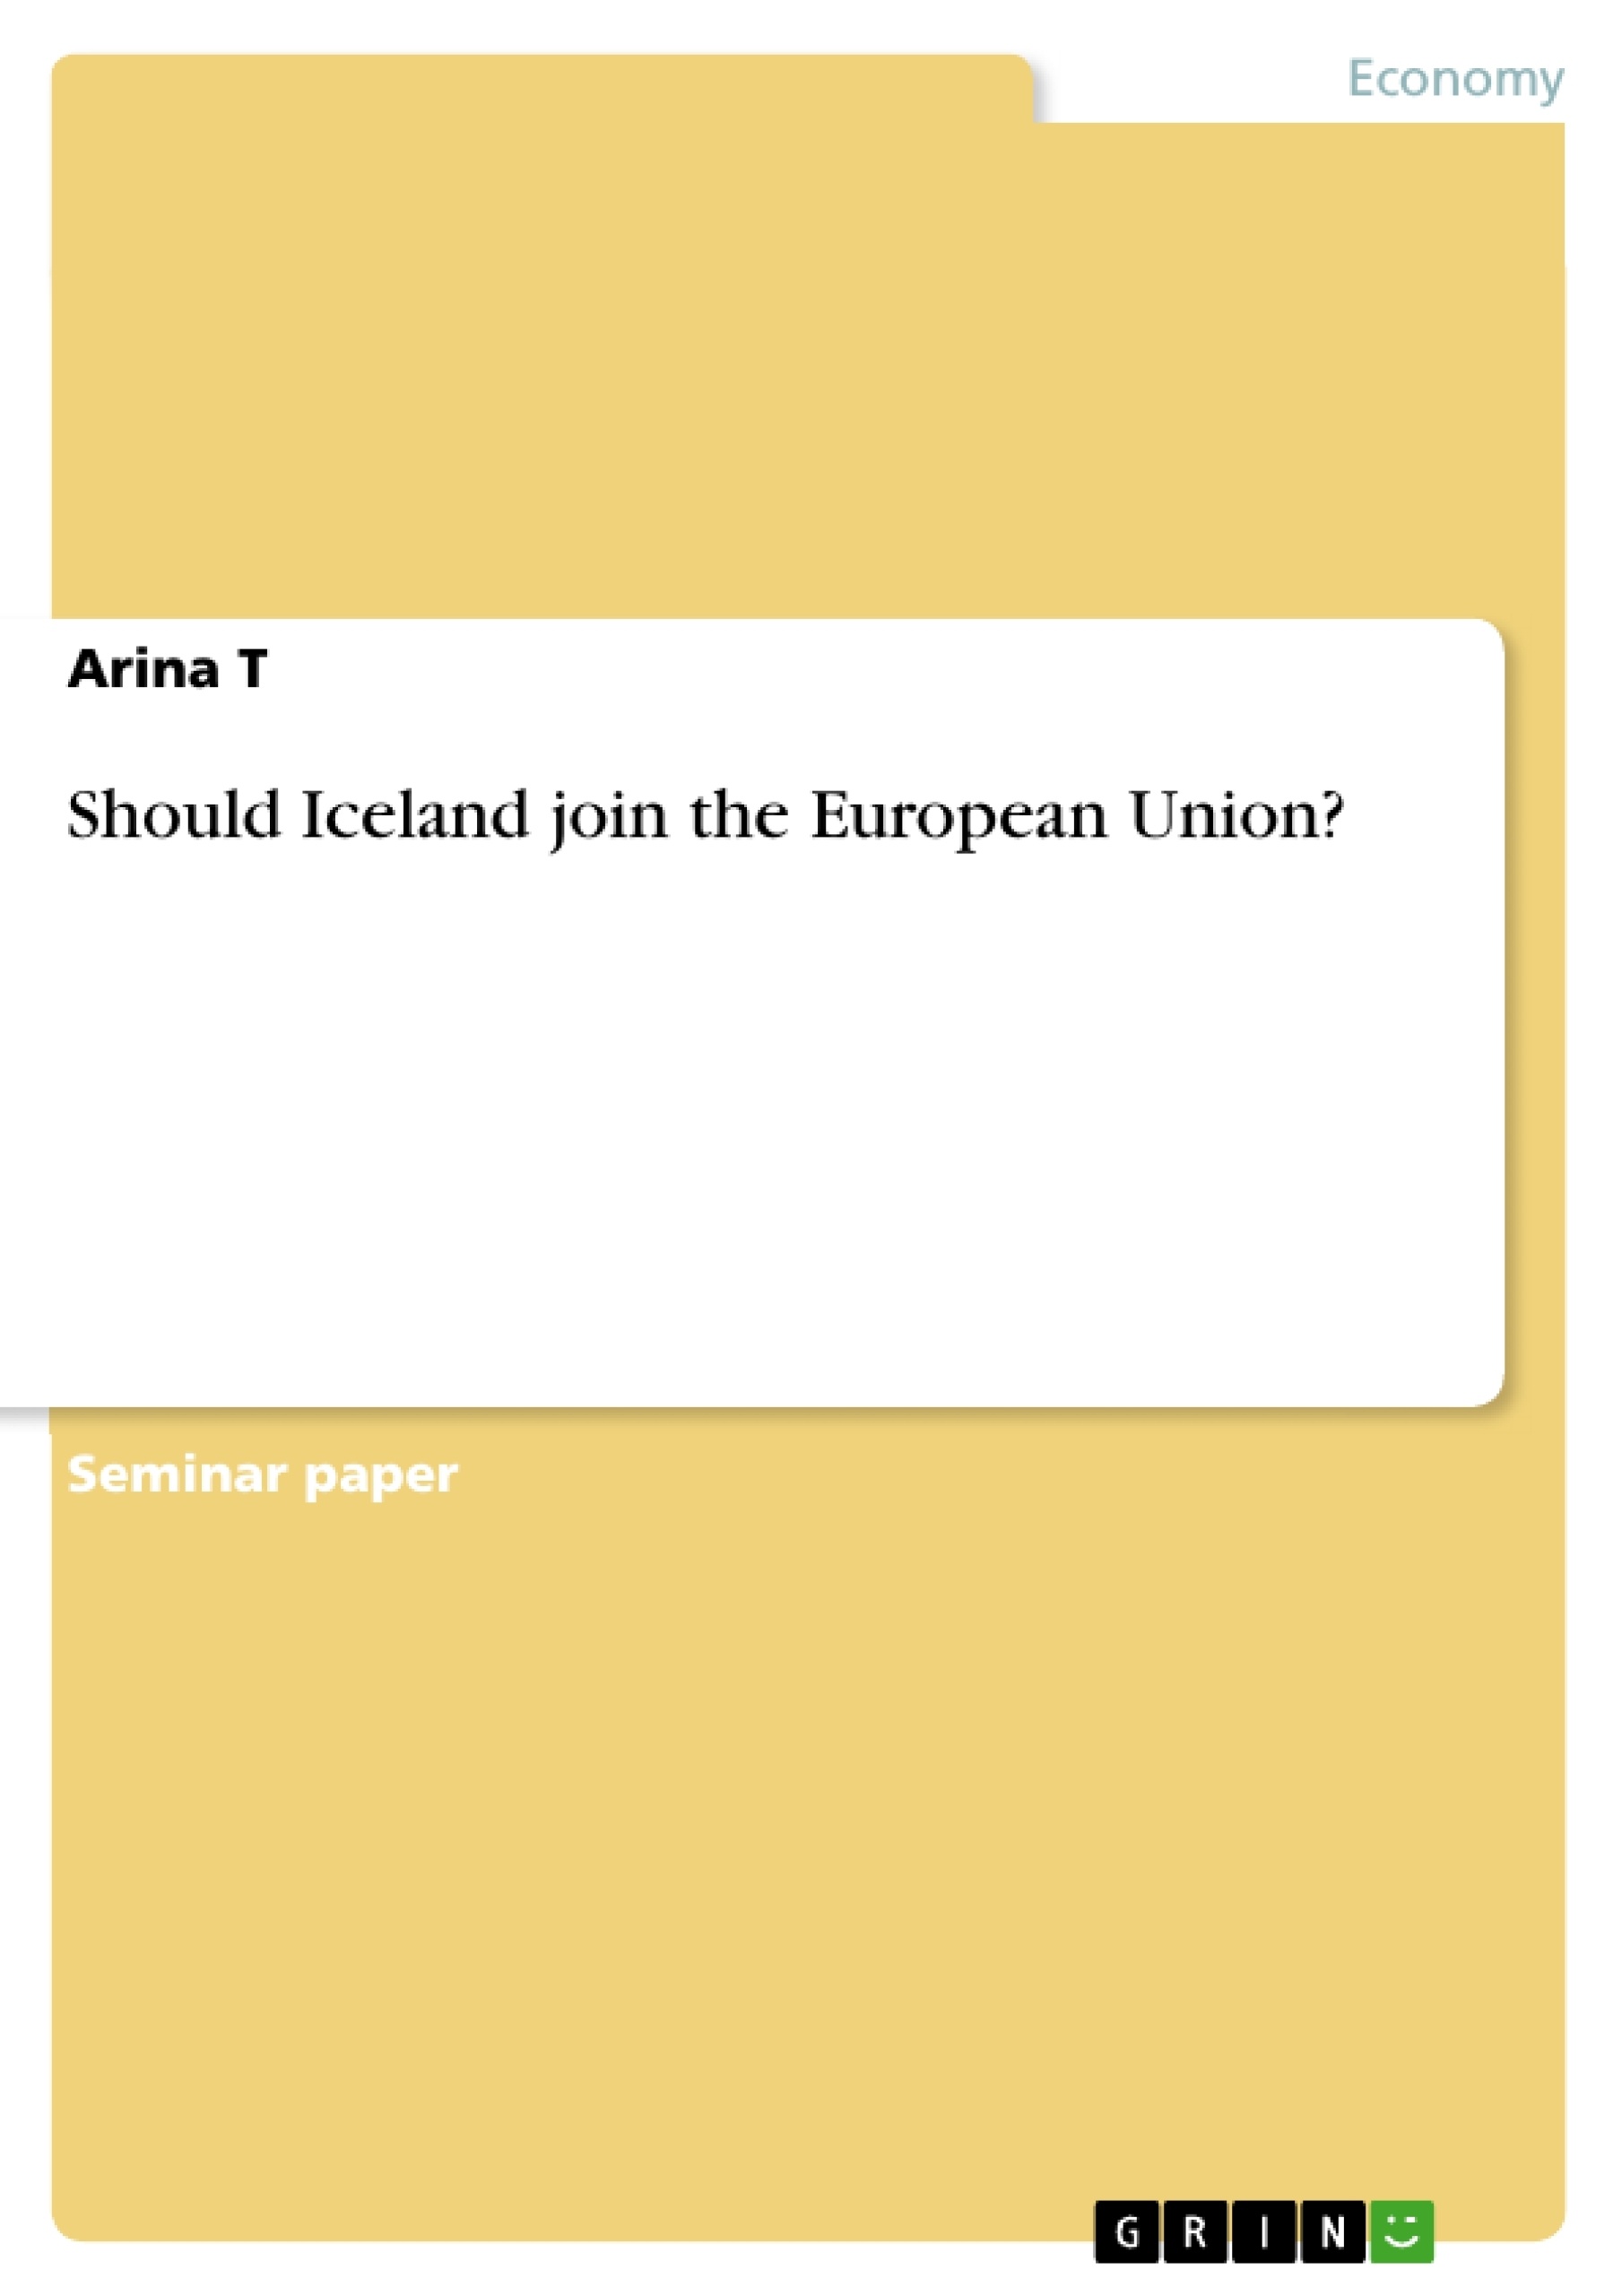 Título: Should Iceland join the European Union?